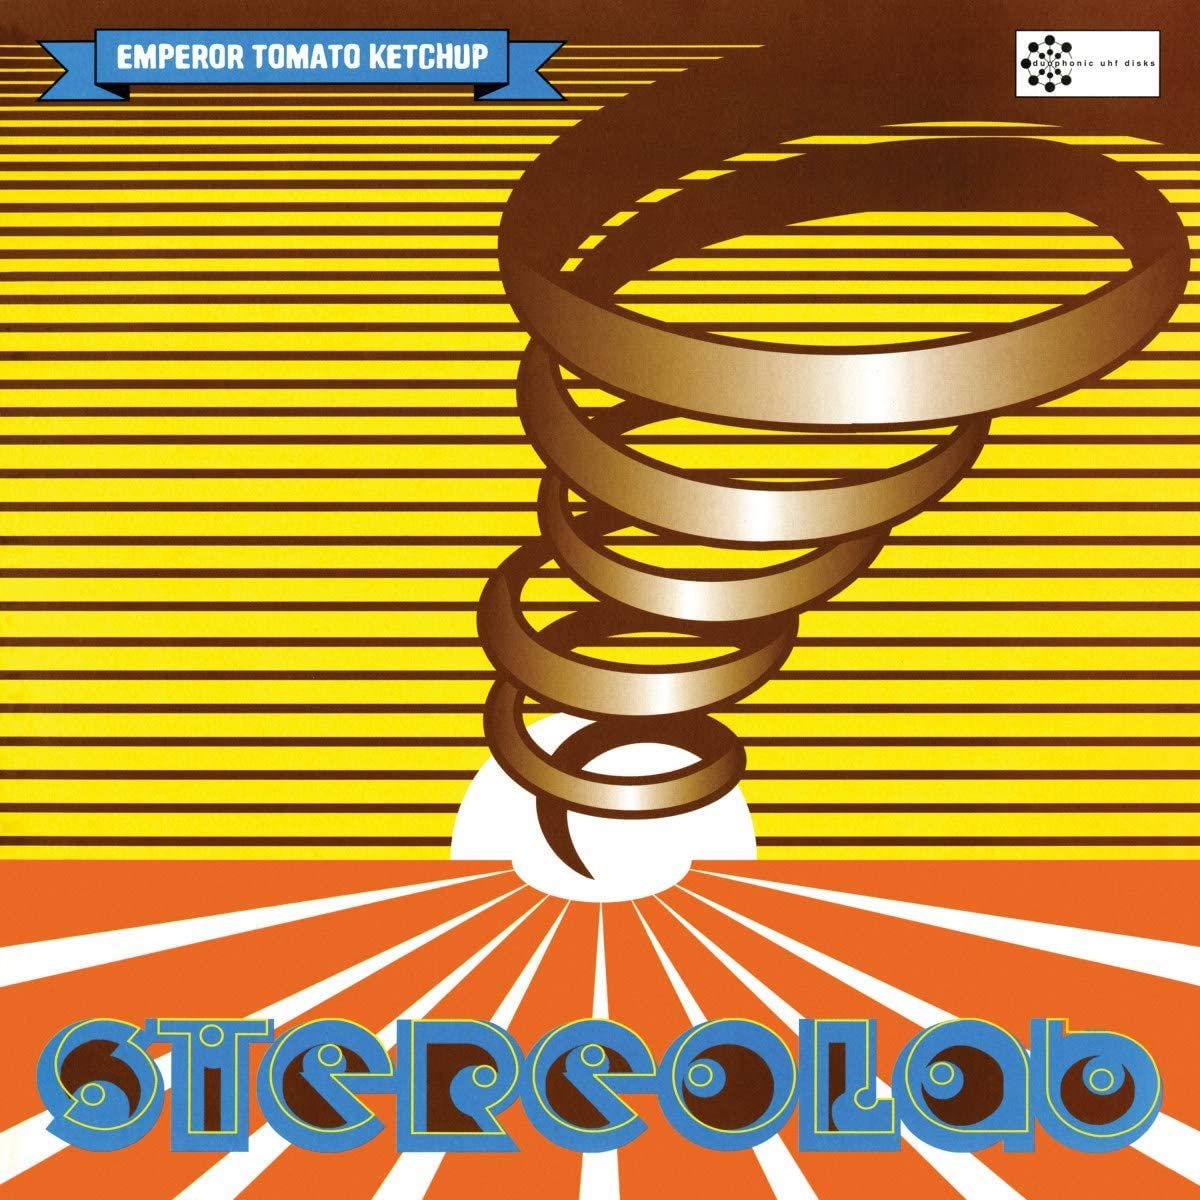 4th Studio Album on Vinyl from 96 from Stereolab featuring Cybele's Reverie.